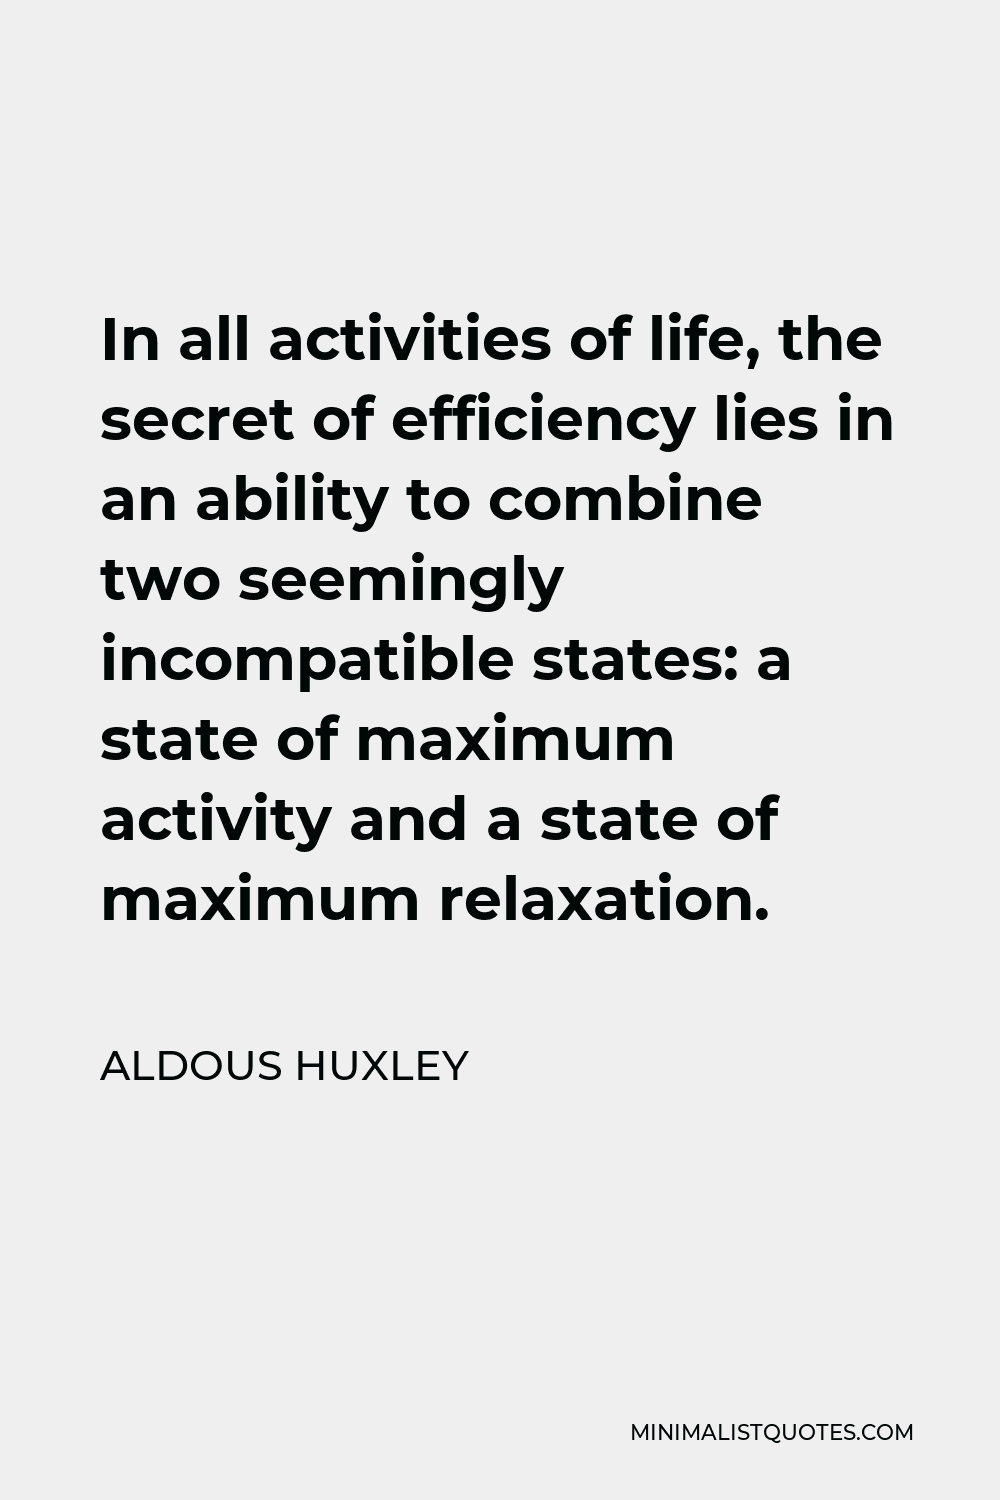 Aldous Huxley Quote - In all activities of life, the secret of efficiency lies in an ability to combine two seemingly incompatible states: a state of maximum activity and a state of maximum relaxation.